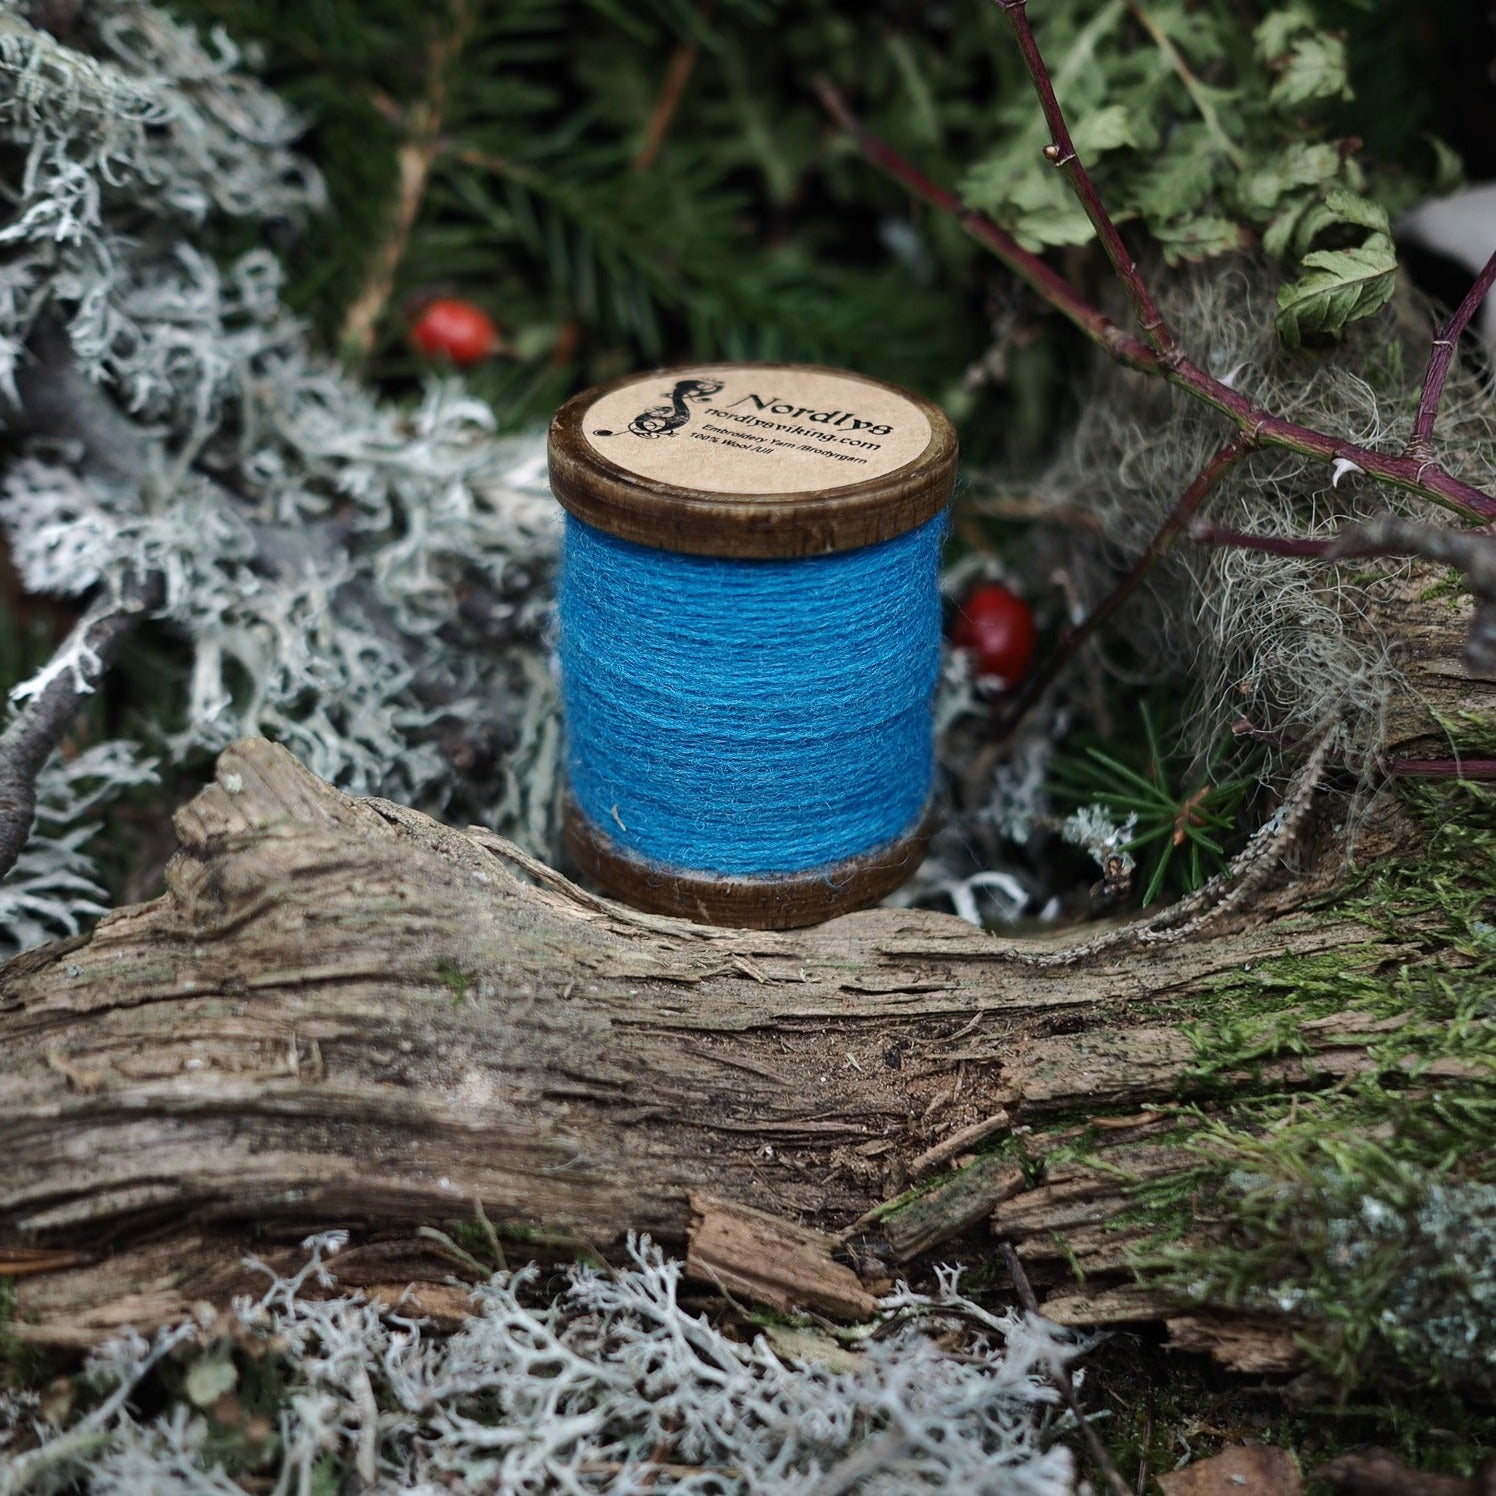 Turquoise embroidery thread 100% wool